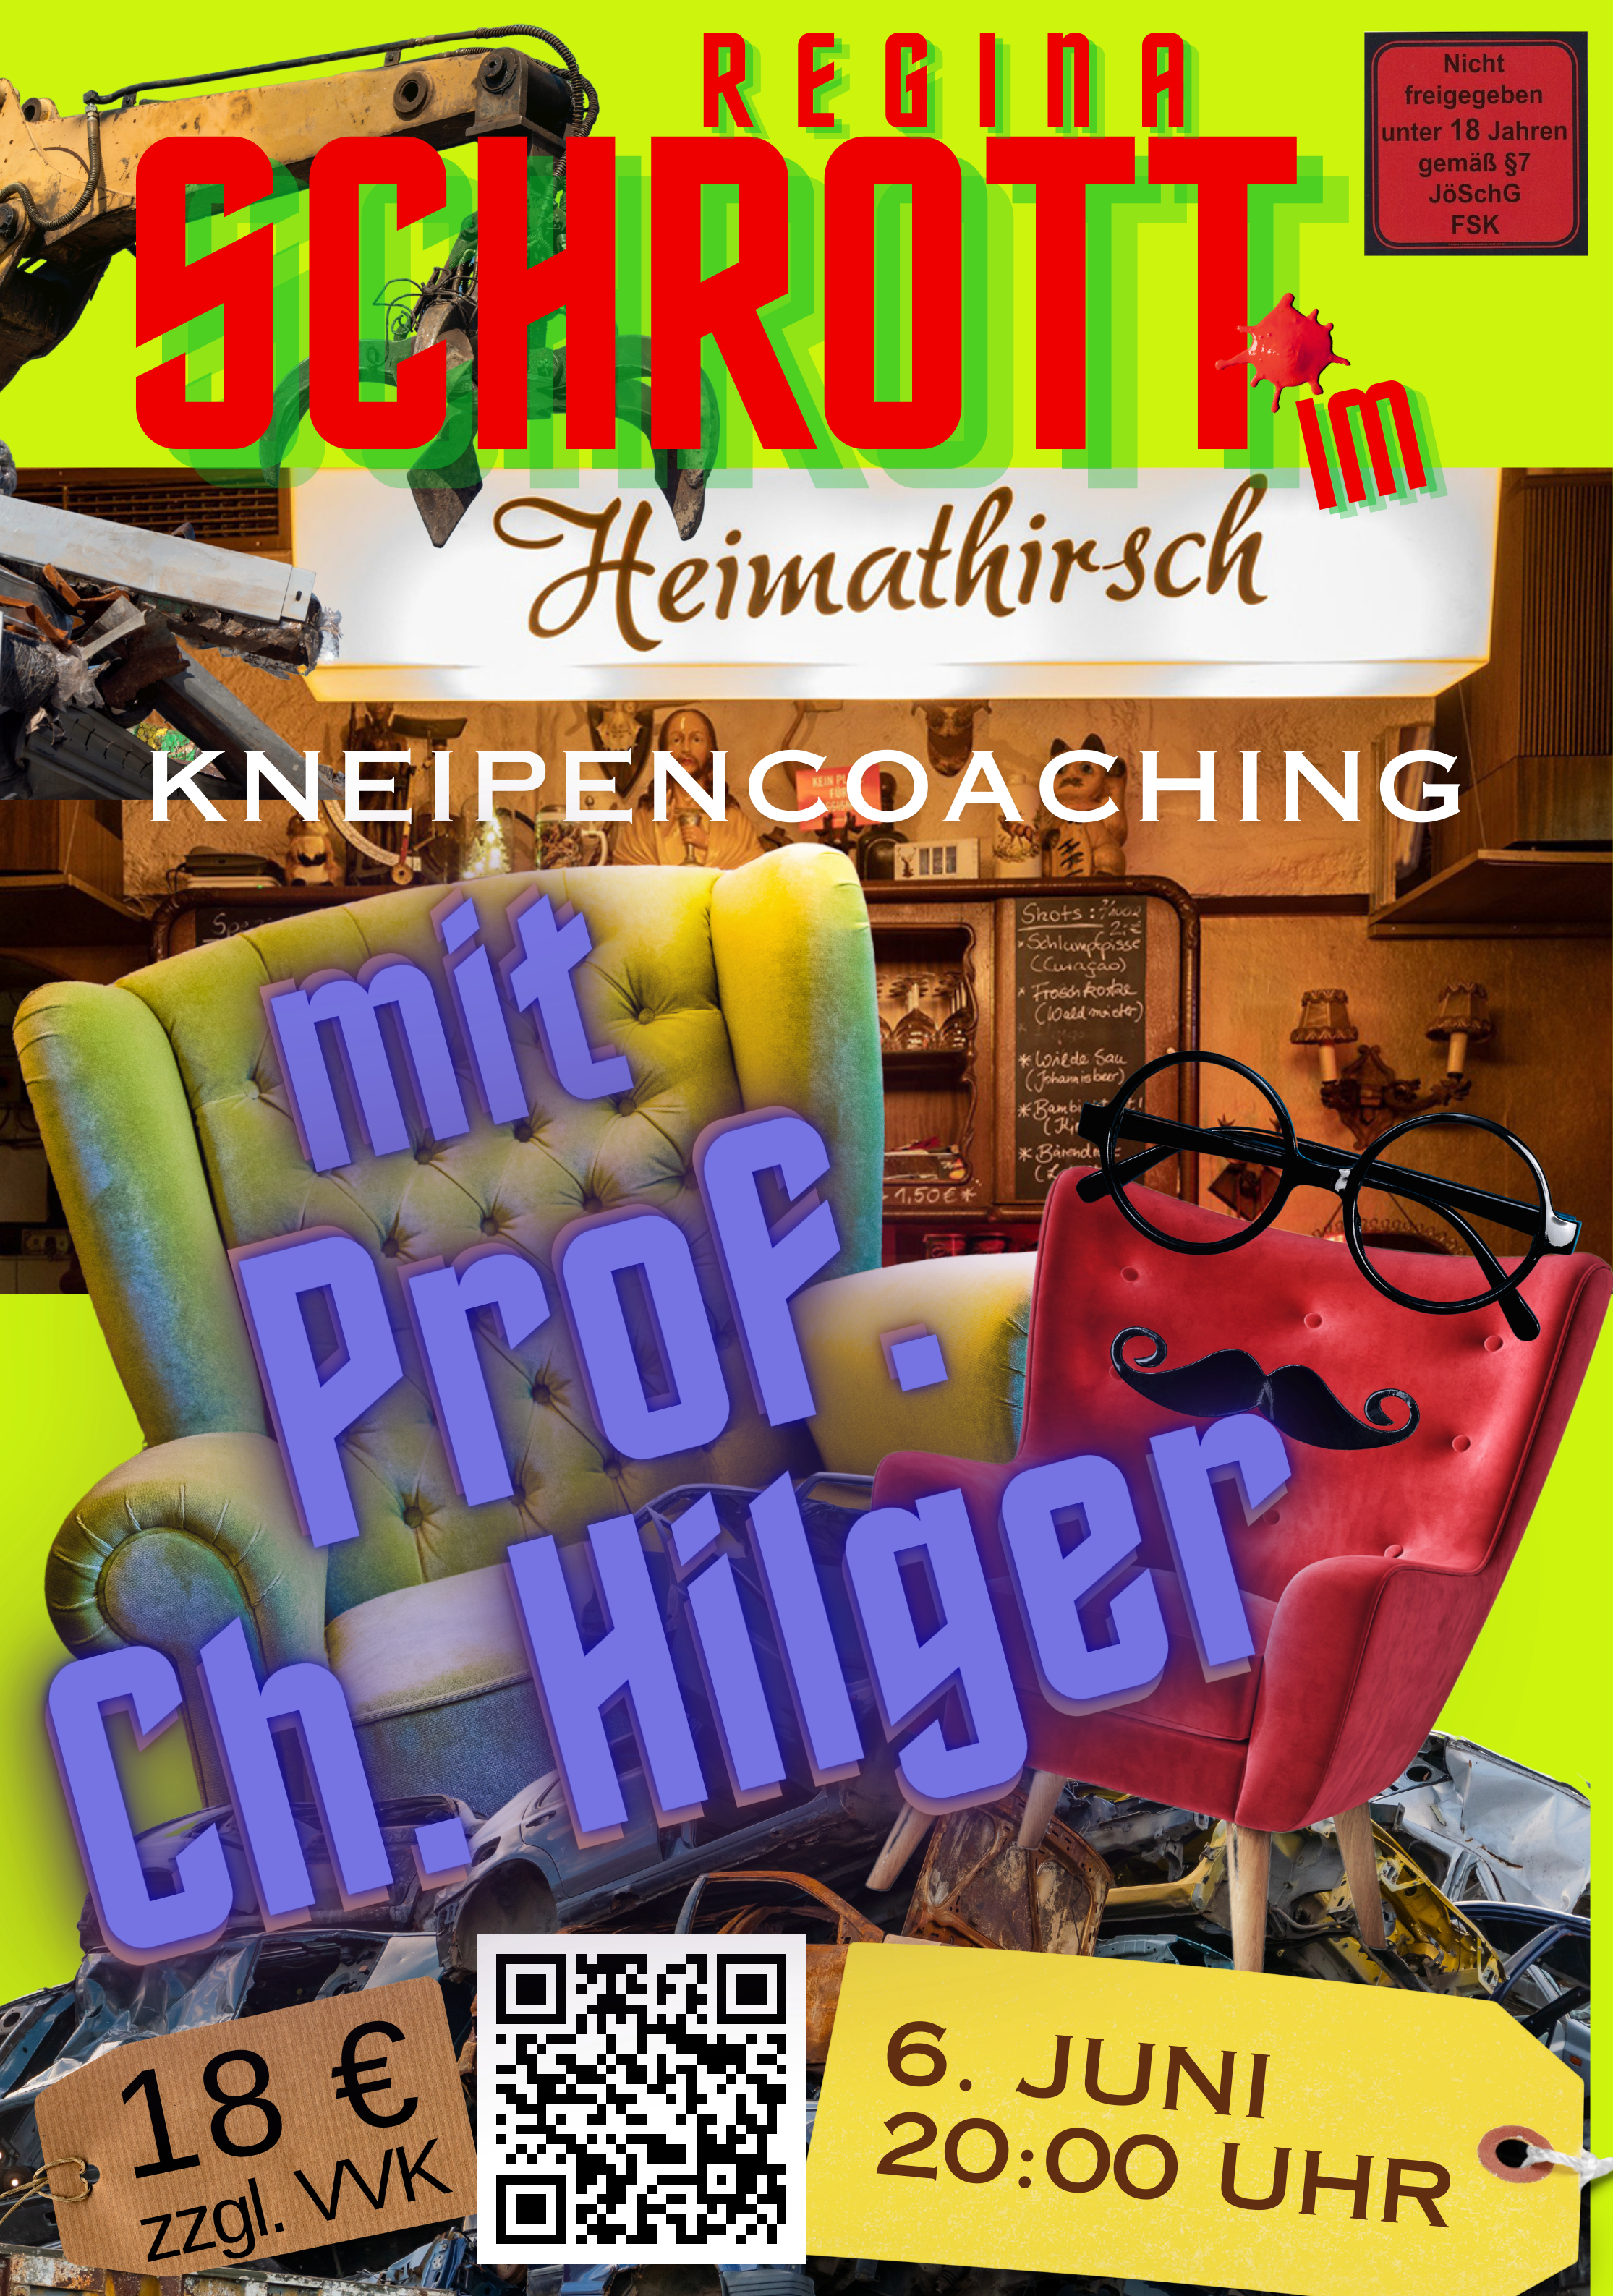 KNEIPENCOACHING mit Christoph Hilger